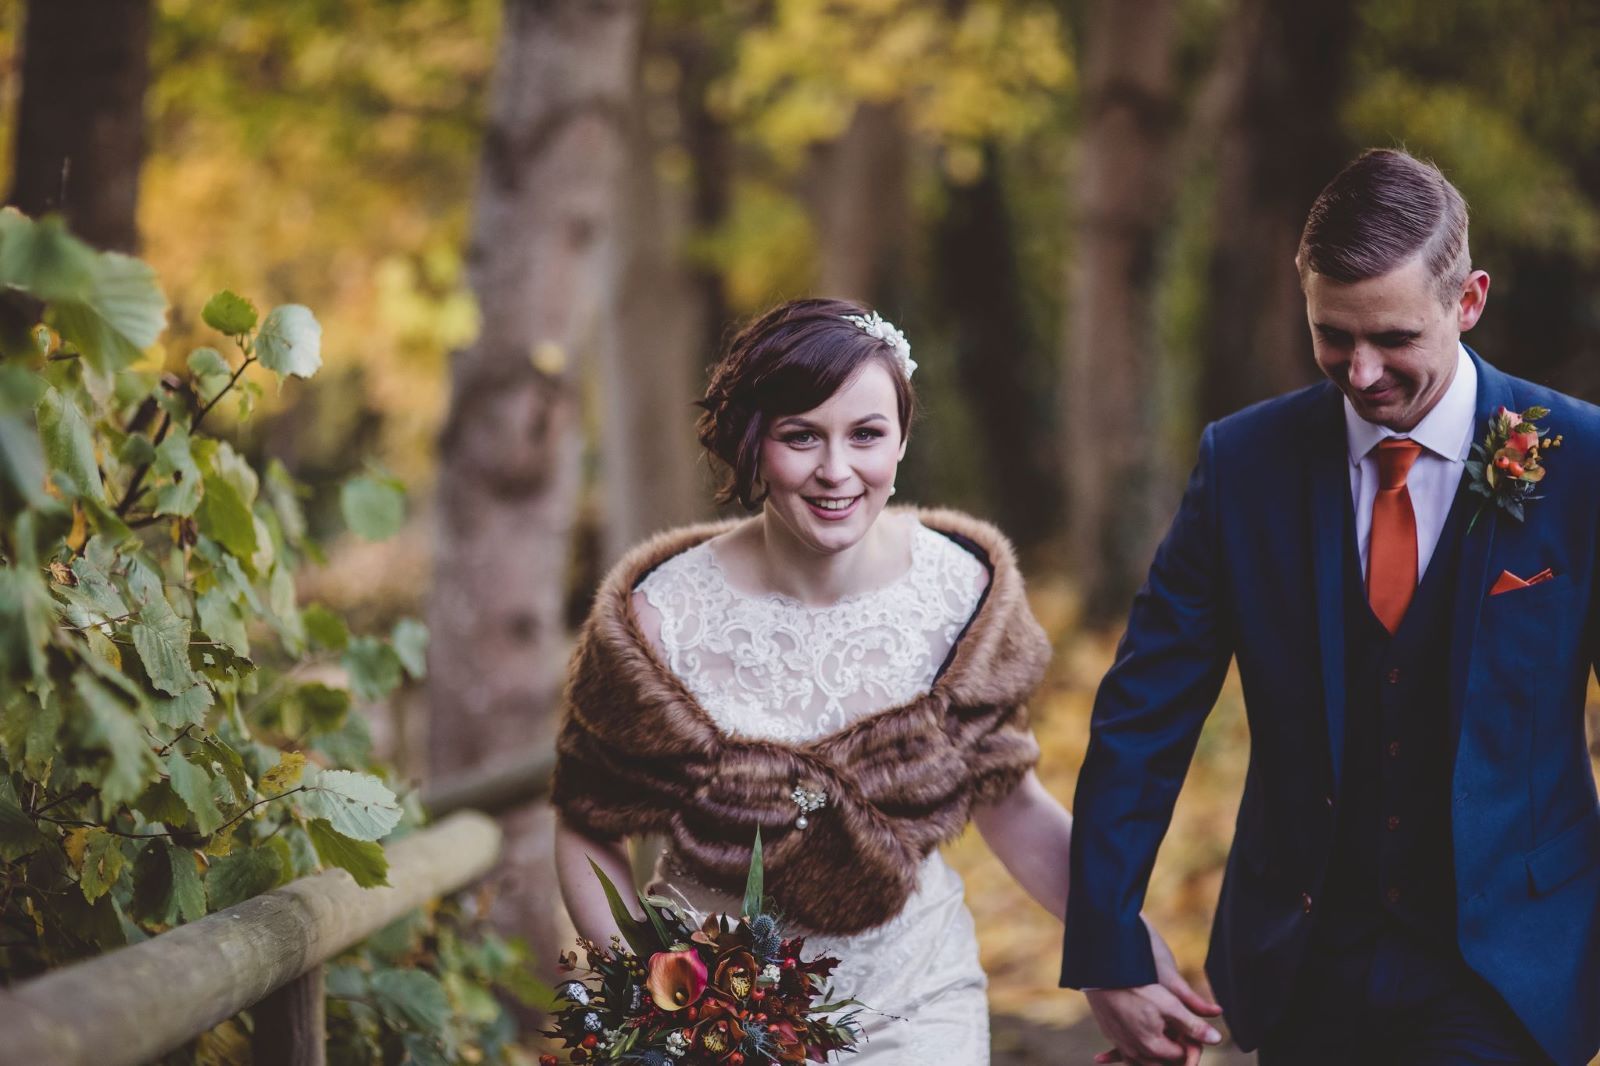 A bride and groom are walking through the woods holding hands.